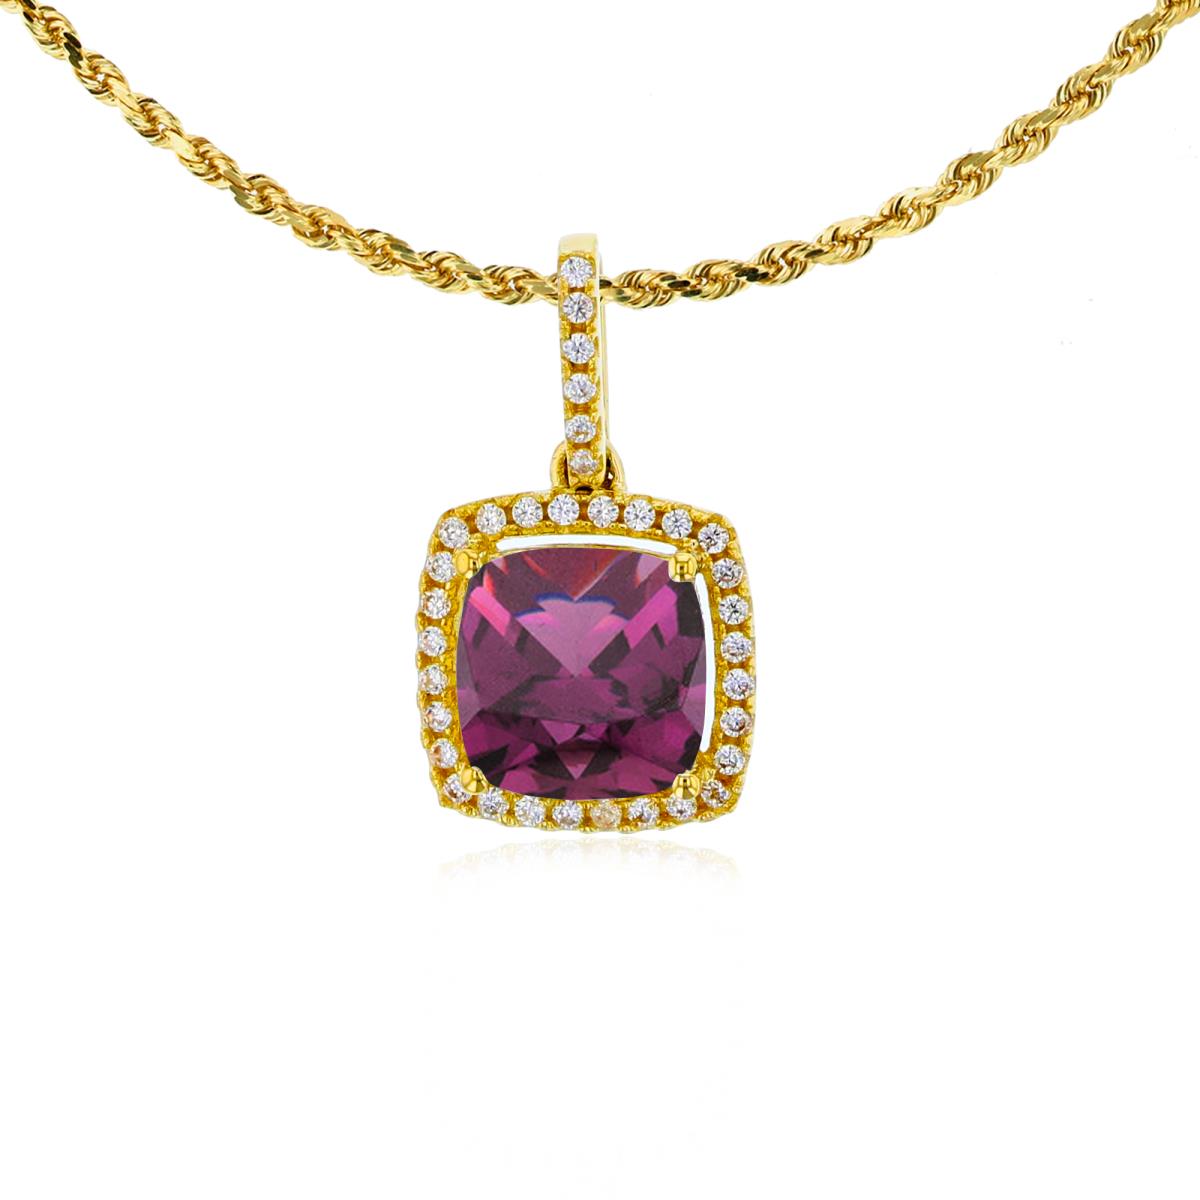 10K Yellow Gold 7mm Cushion Rhodolite & 0.14 CTTW Rnd Diamond Halo 18" Rope Chain Necklace